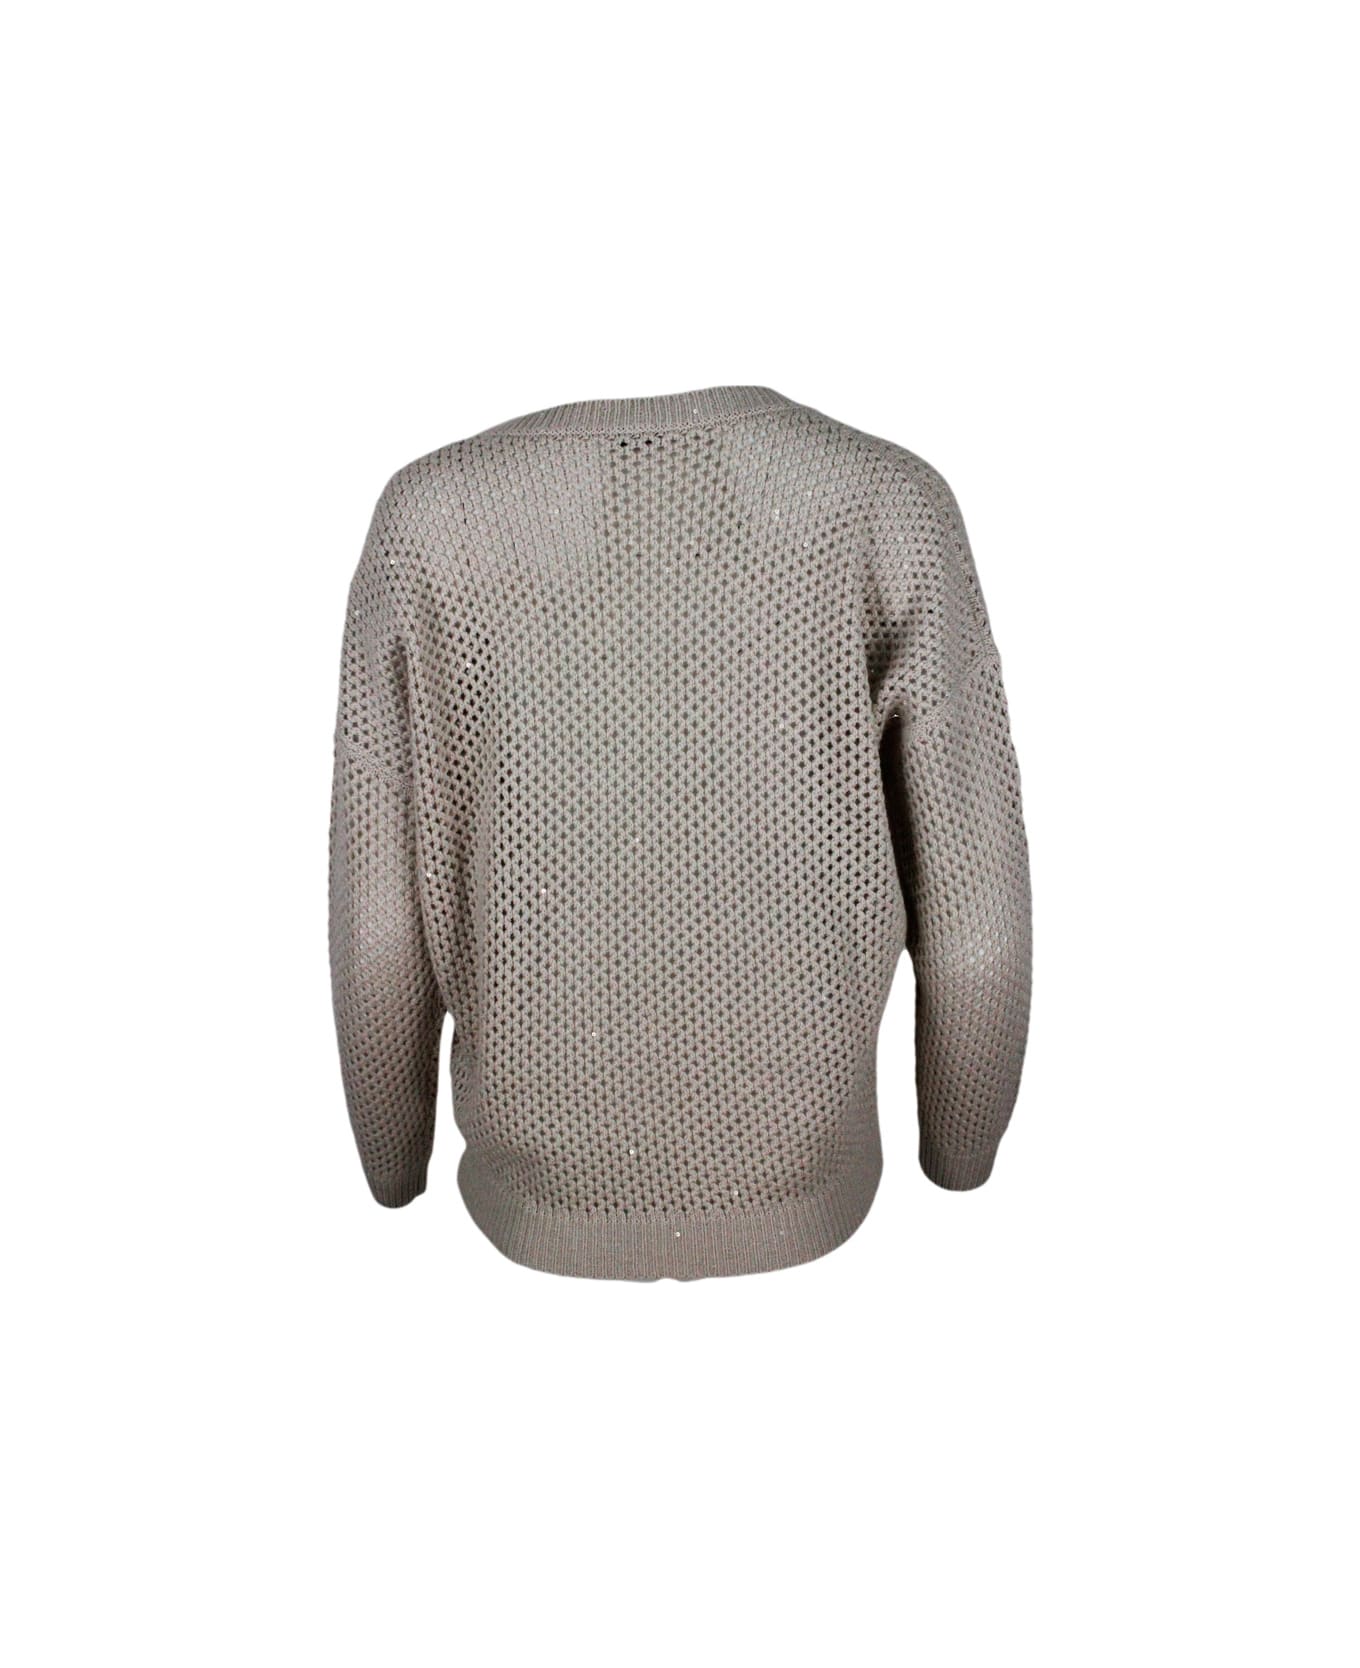 Brunello Cucinelli V-neck Sweater In Cashmere And Silk With Mesh Processing Embellished With Micro Sequins - Beige